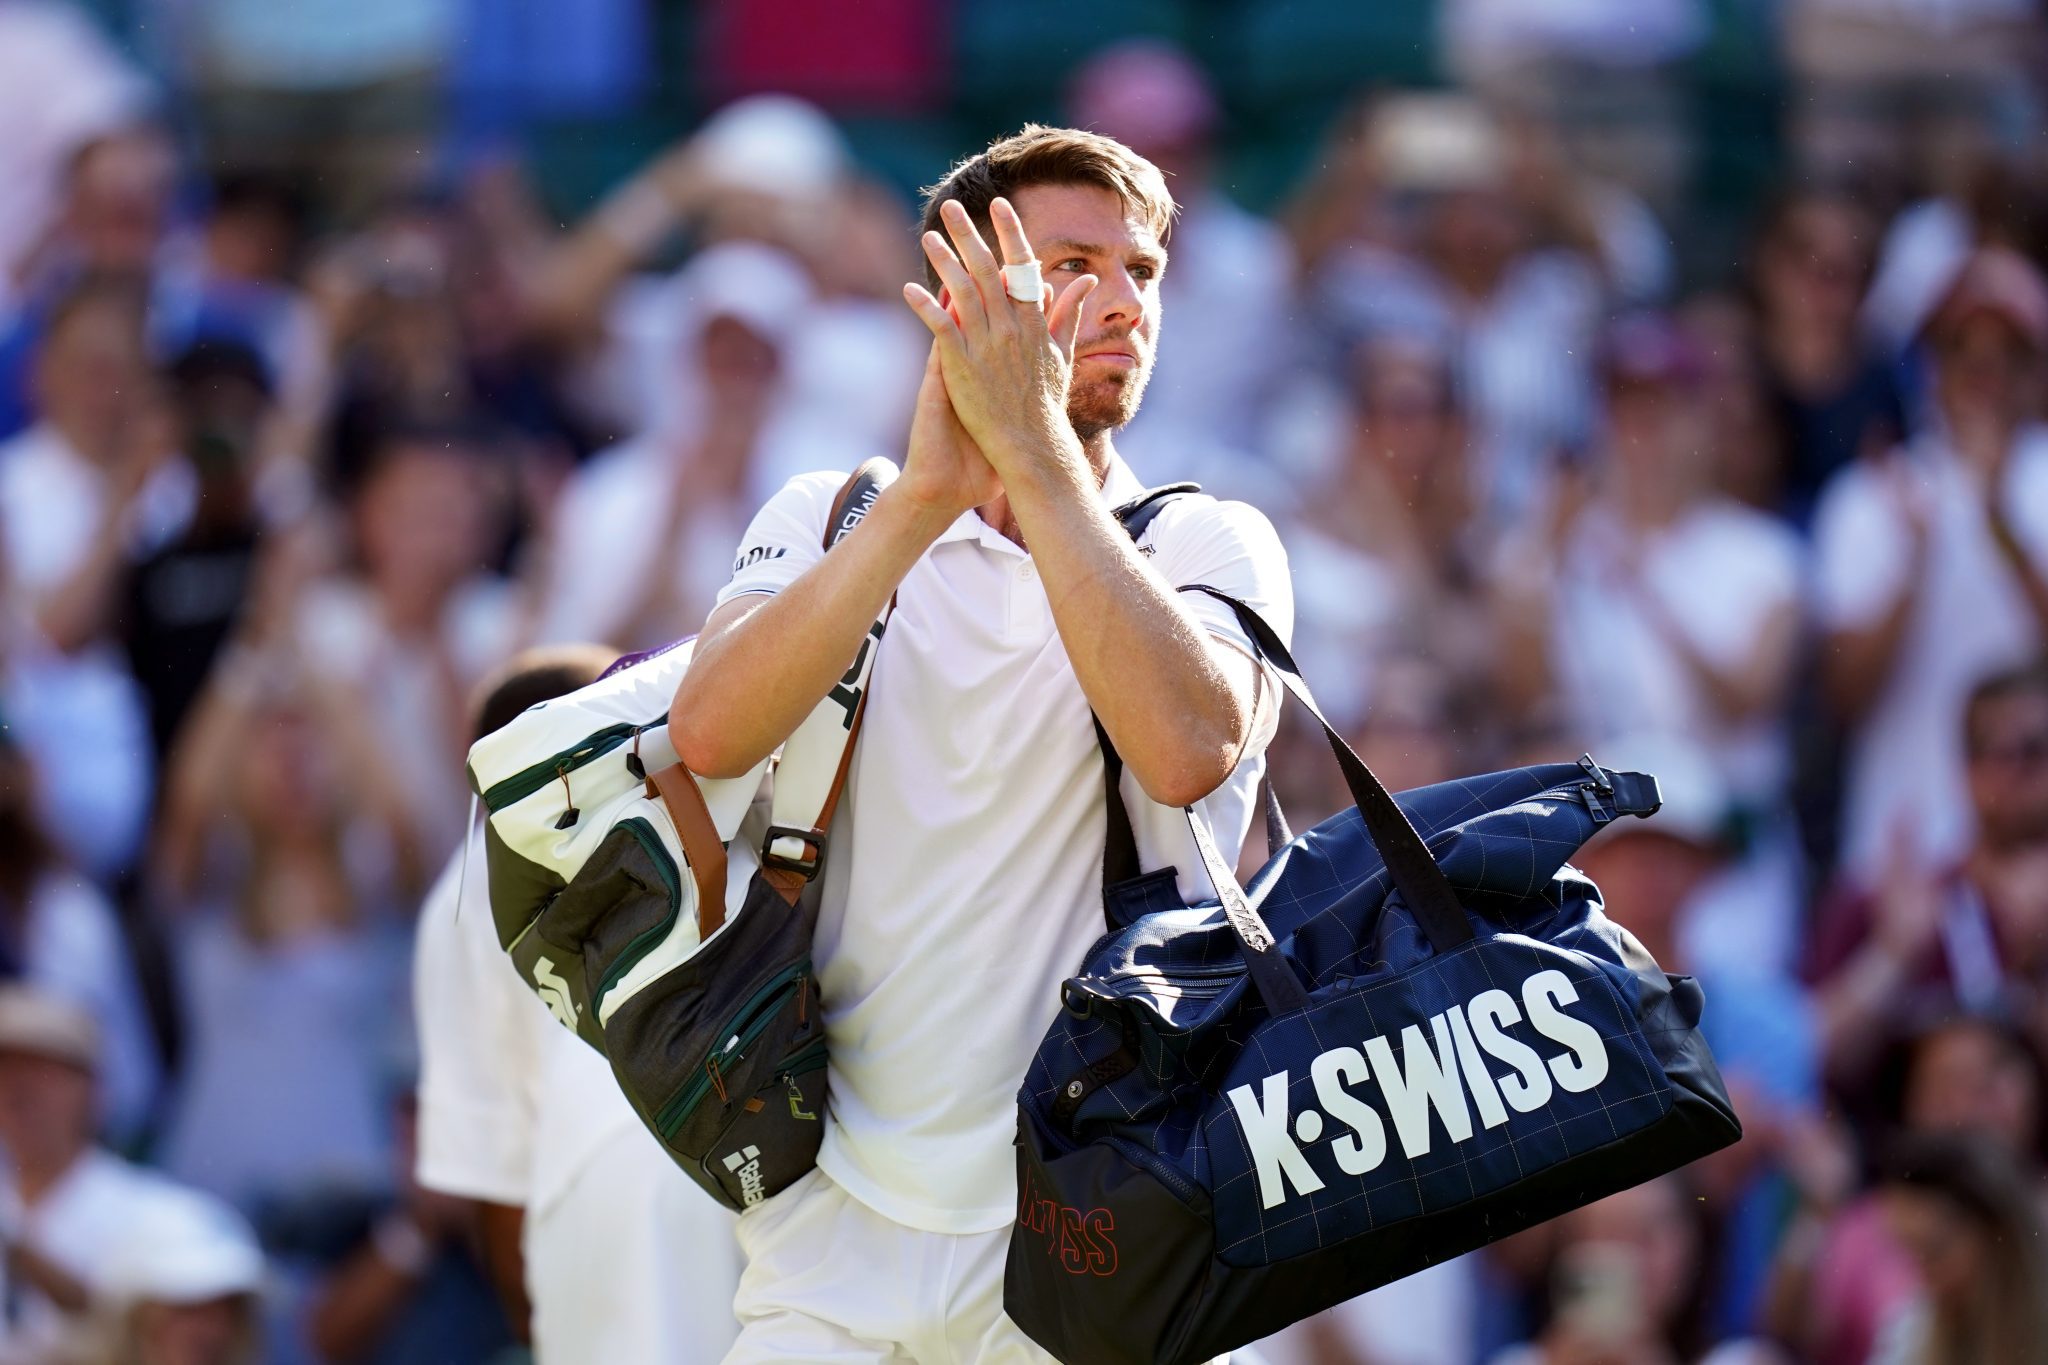 I got outplayed – Cameron Norrie knocked out of Wimbledon by Chris Eubanks